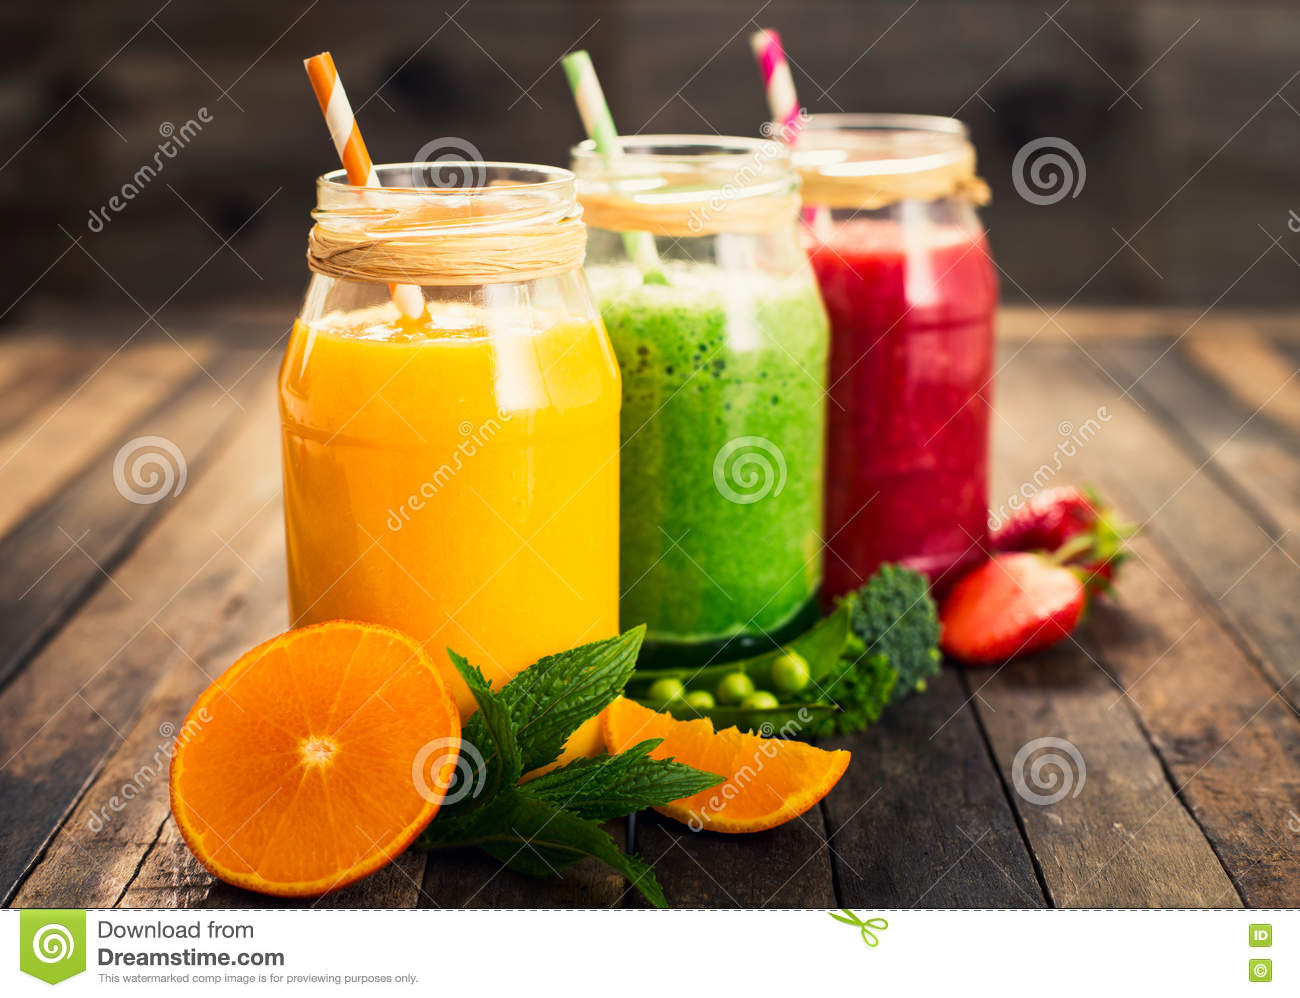 Vegetables And Fruit Smoothies
 Healthy Fruit And Ve able Smoothies Stock Image Image